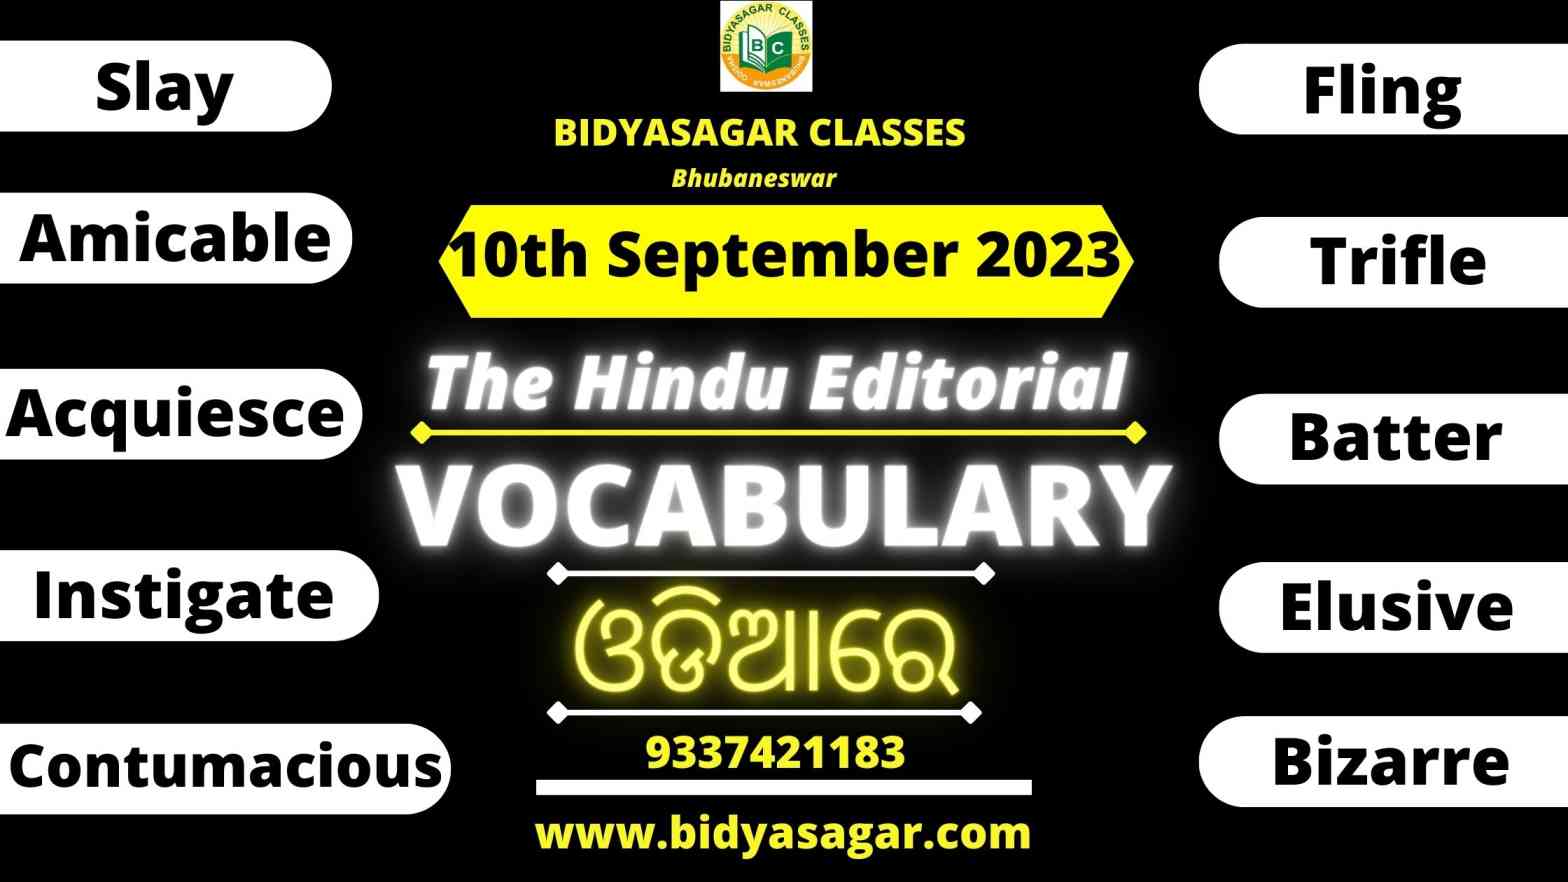 The Hindu Editorial Vocabulary of 10th September 2023